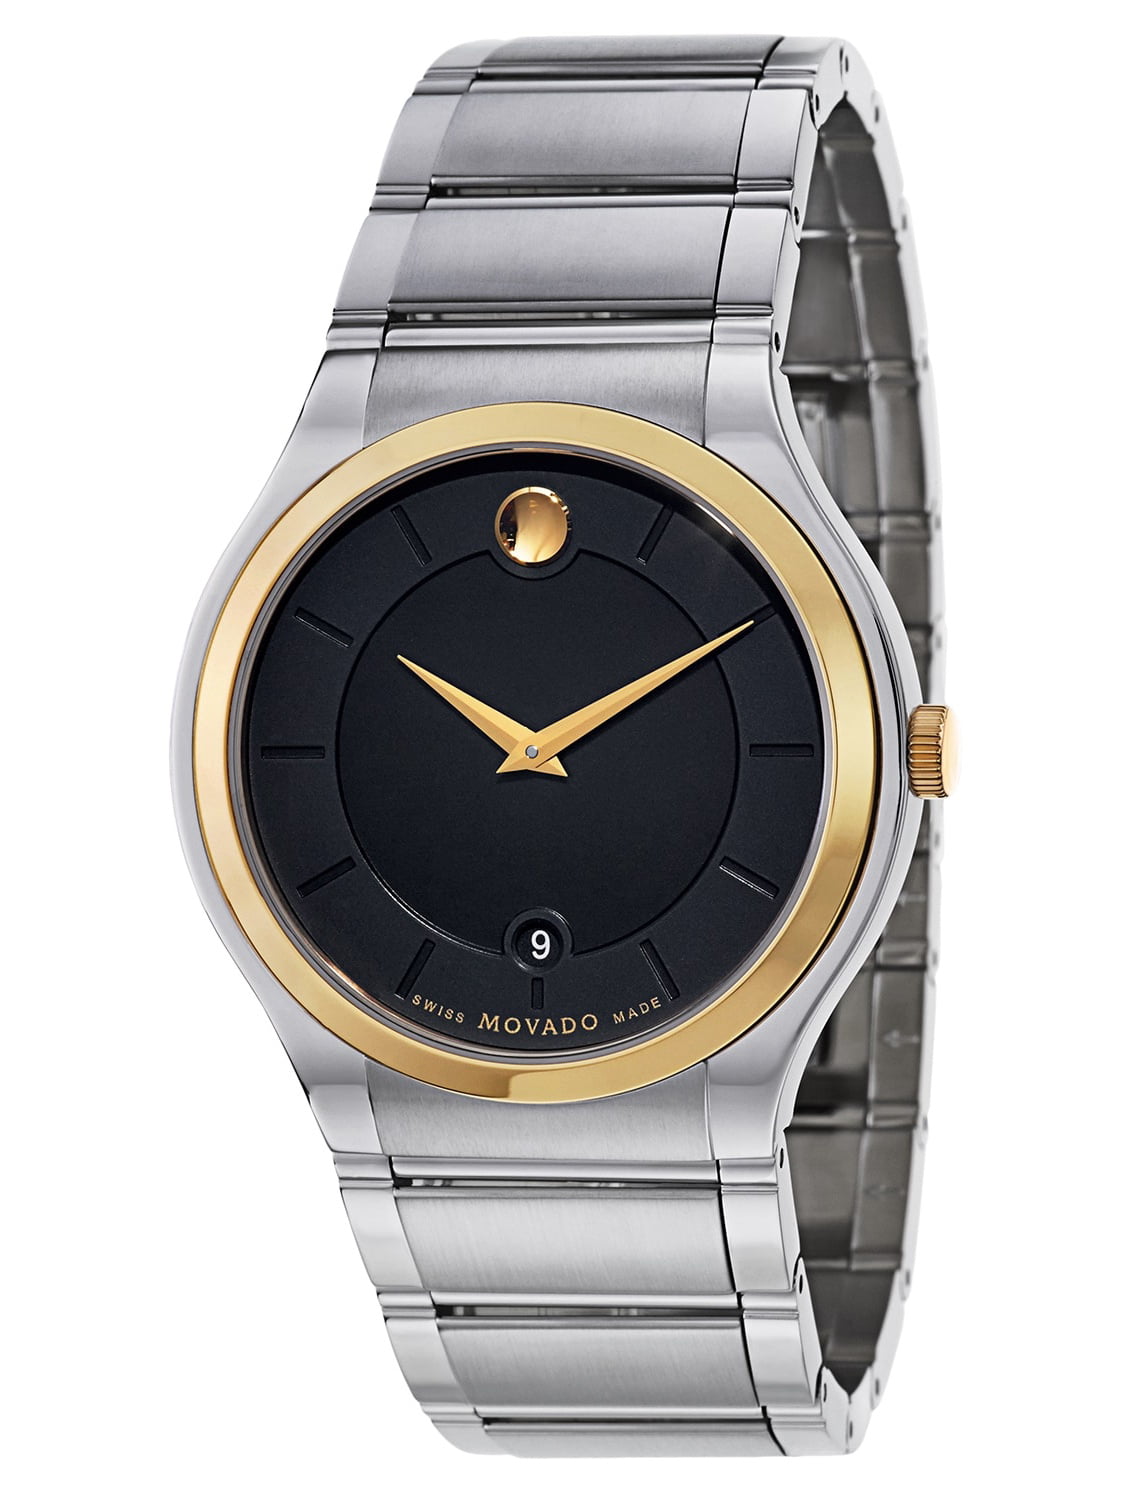 Movado - Movado Men's Quadro Two-tone Stainless Steel Black Dial Watch Stainless Steel Movado Watch Men